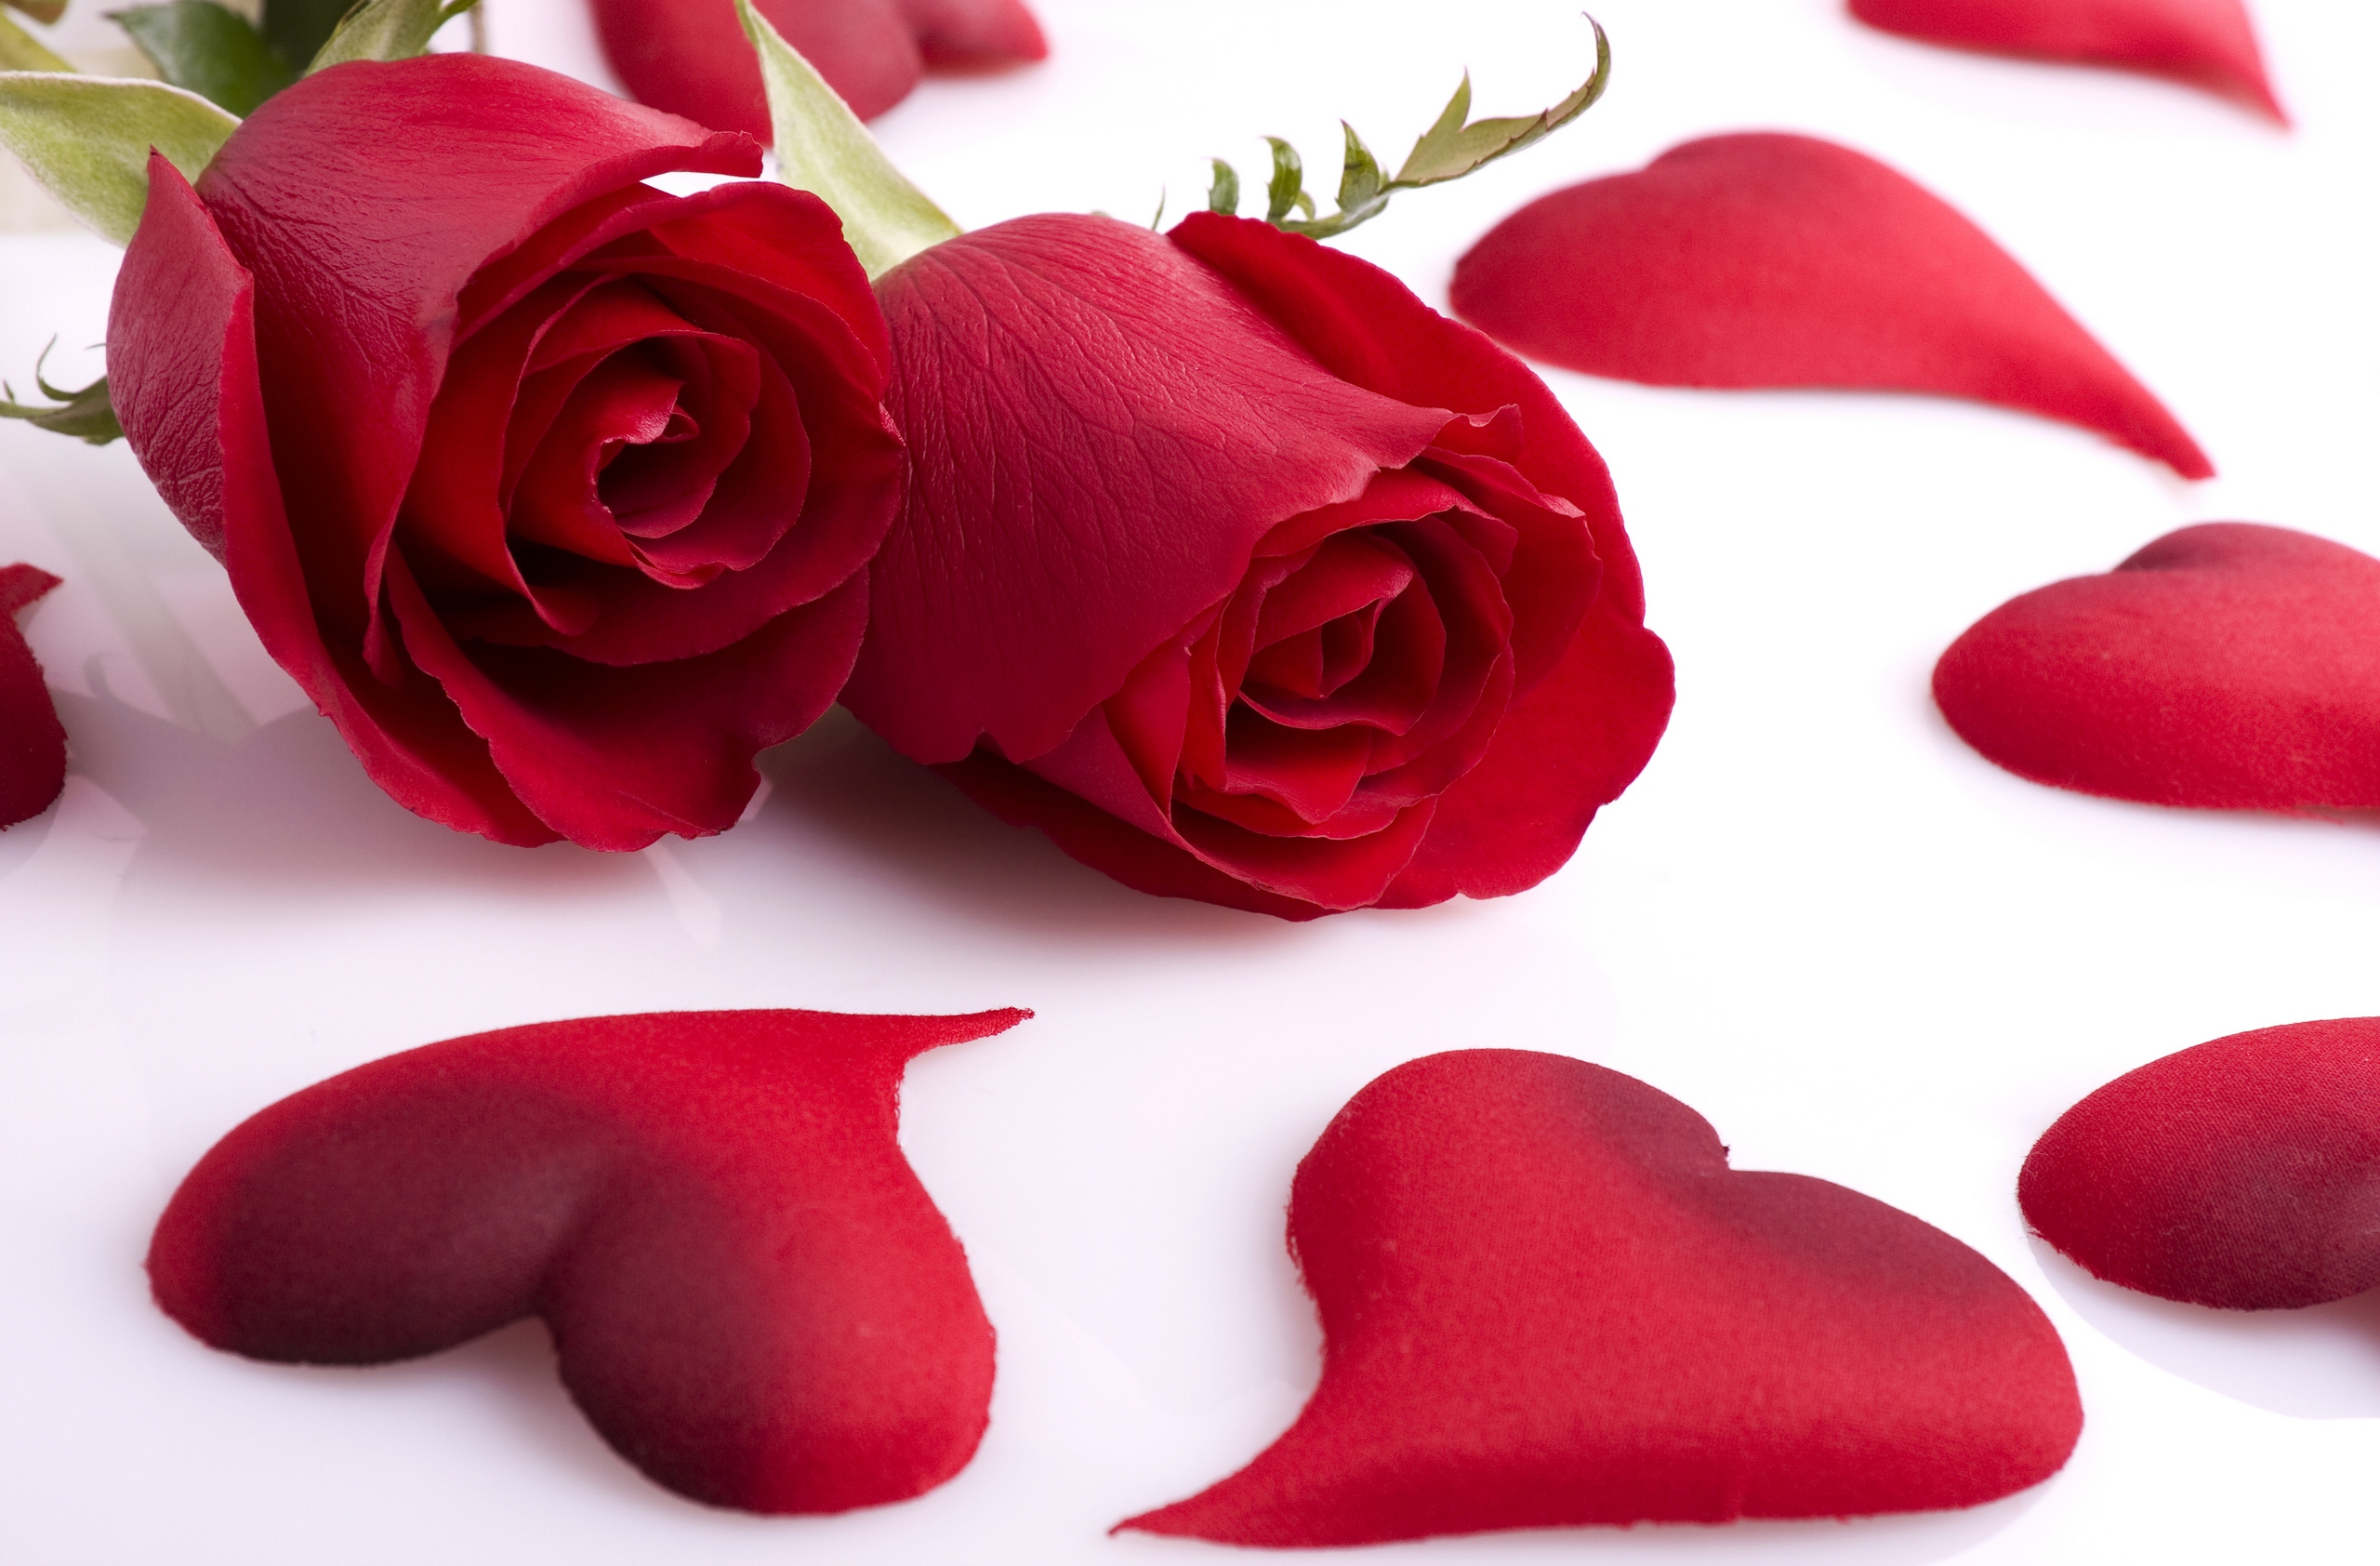 Beautiful Red Rose Image To